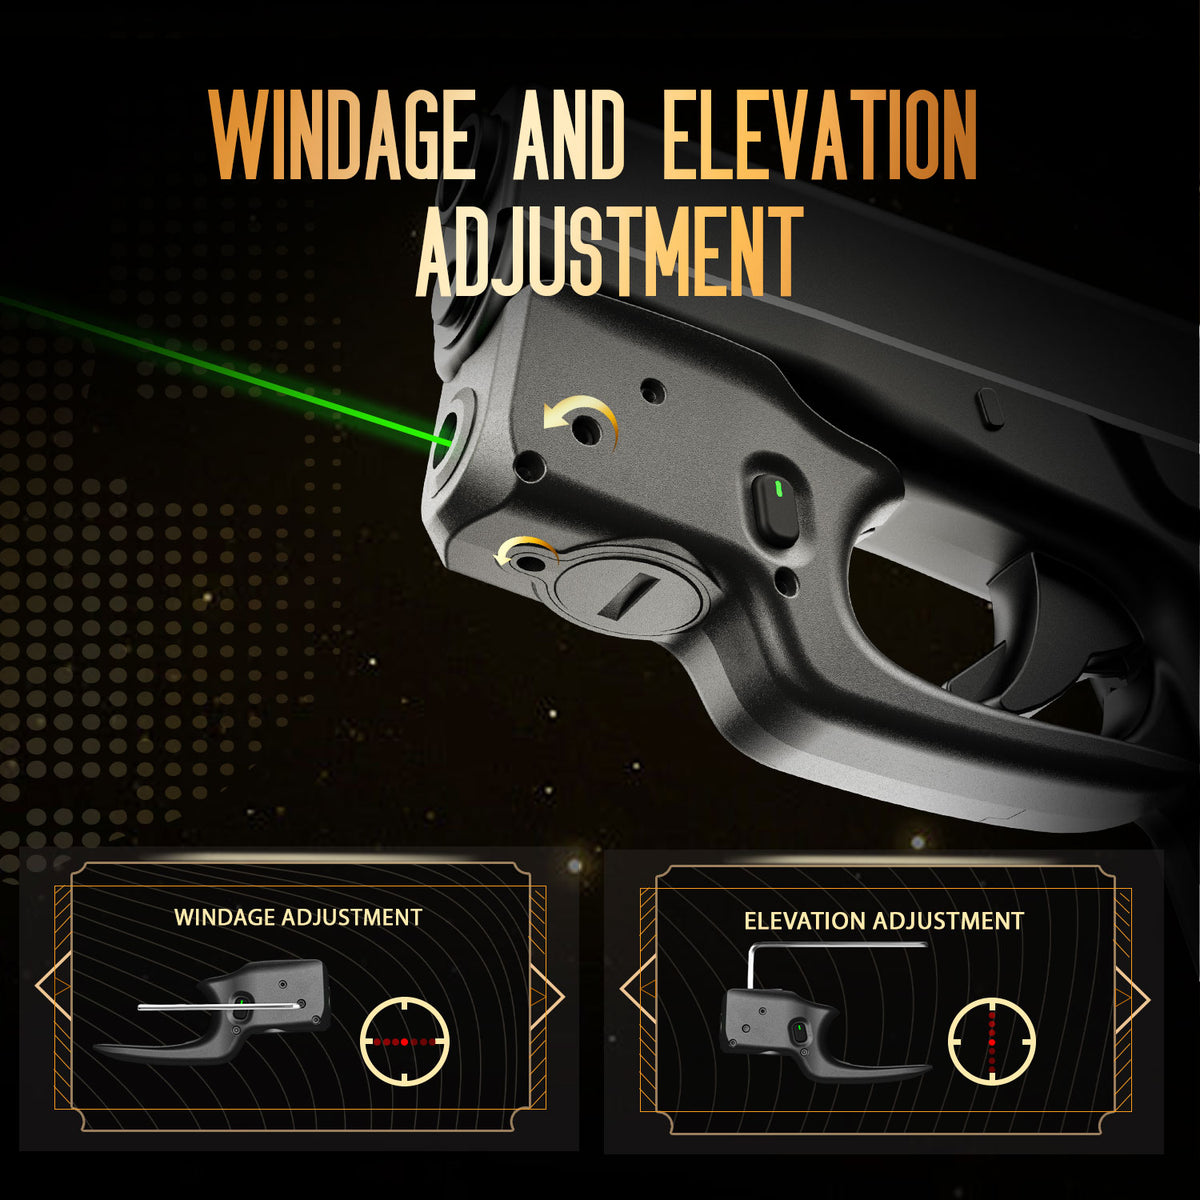 Green Laser Sight Tailored Fit G42 / G43 / G43X / G48, Ultra Compact G43 Beam Sight, Gun Sight with Ambidextrous On/Off Switch & Power Indicator, WLS-105G|WARRIORLAND